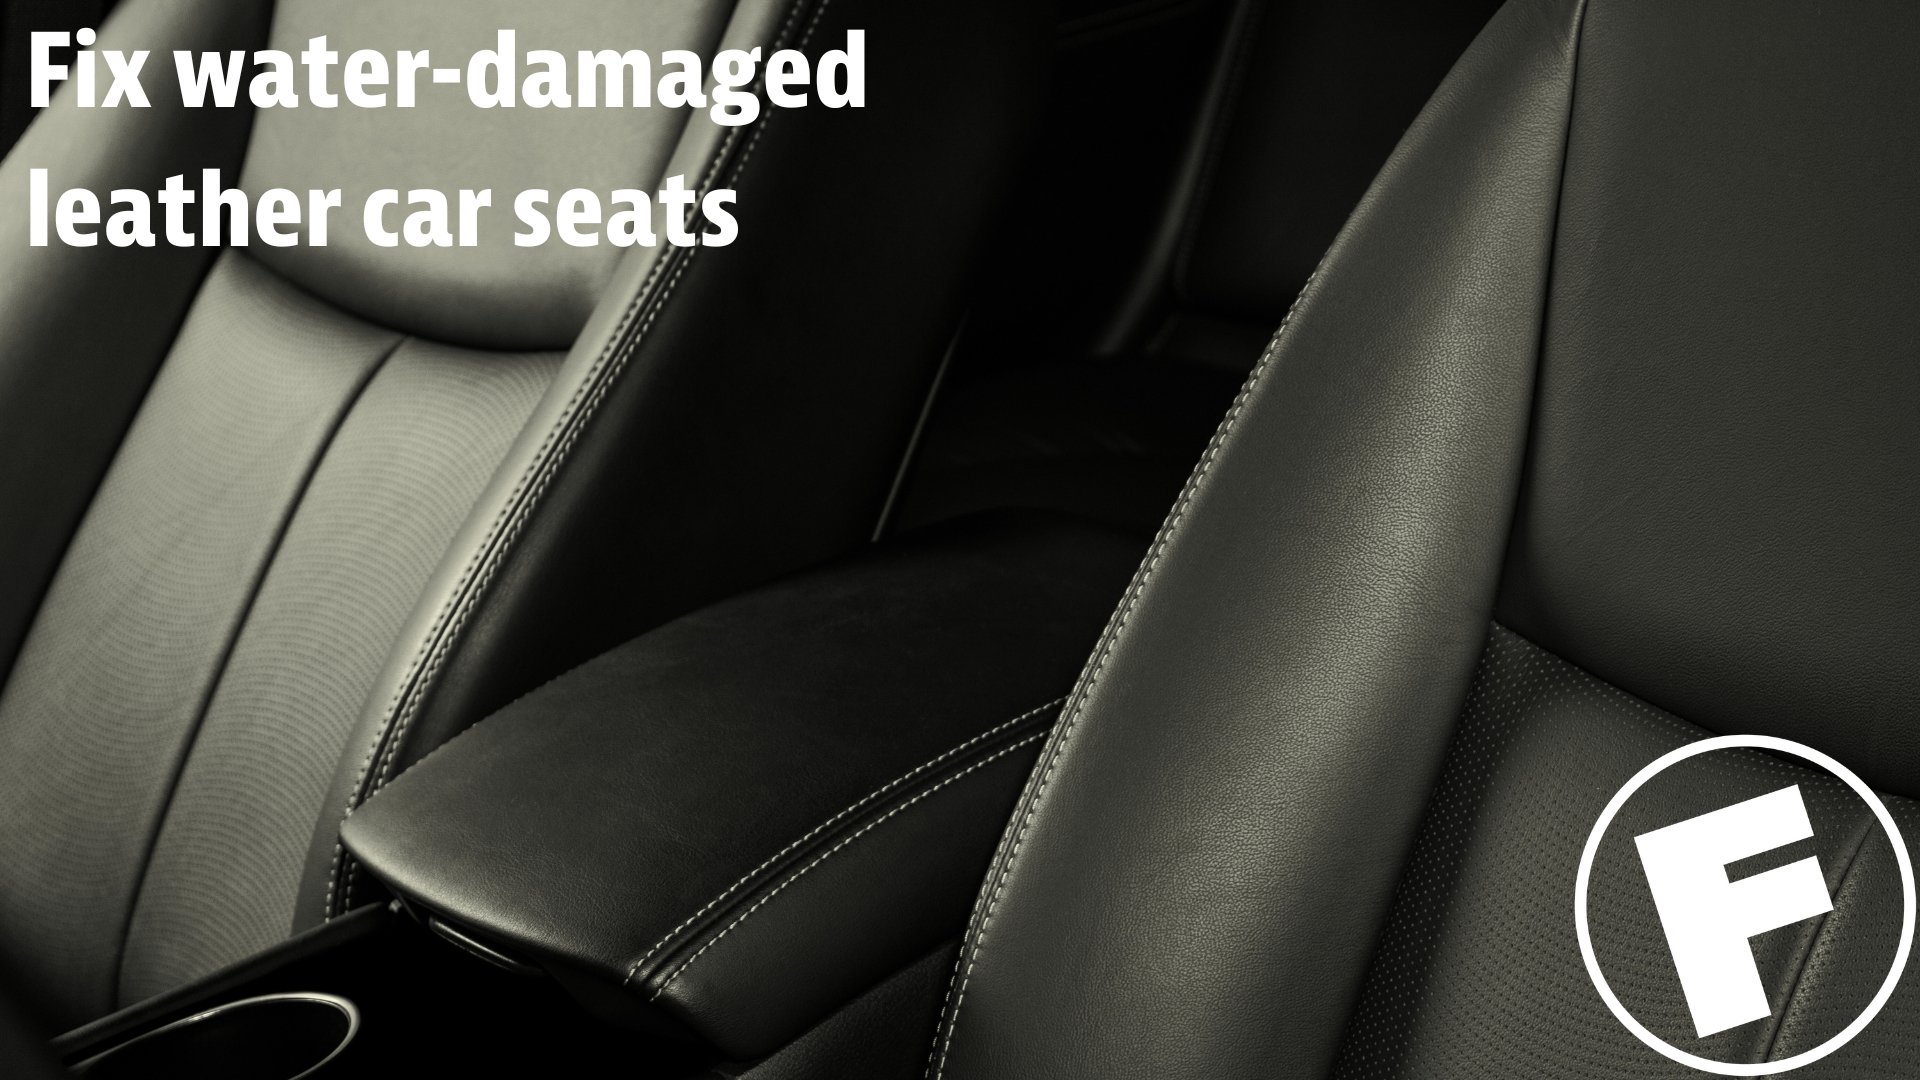 How to Clean and Protect Leather Seats - Automotive Cleaning Products